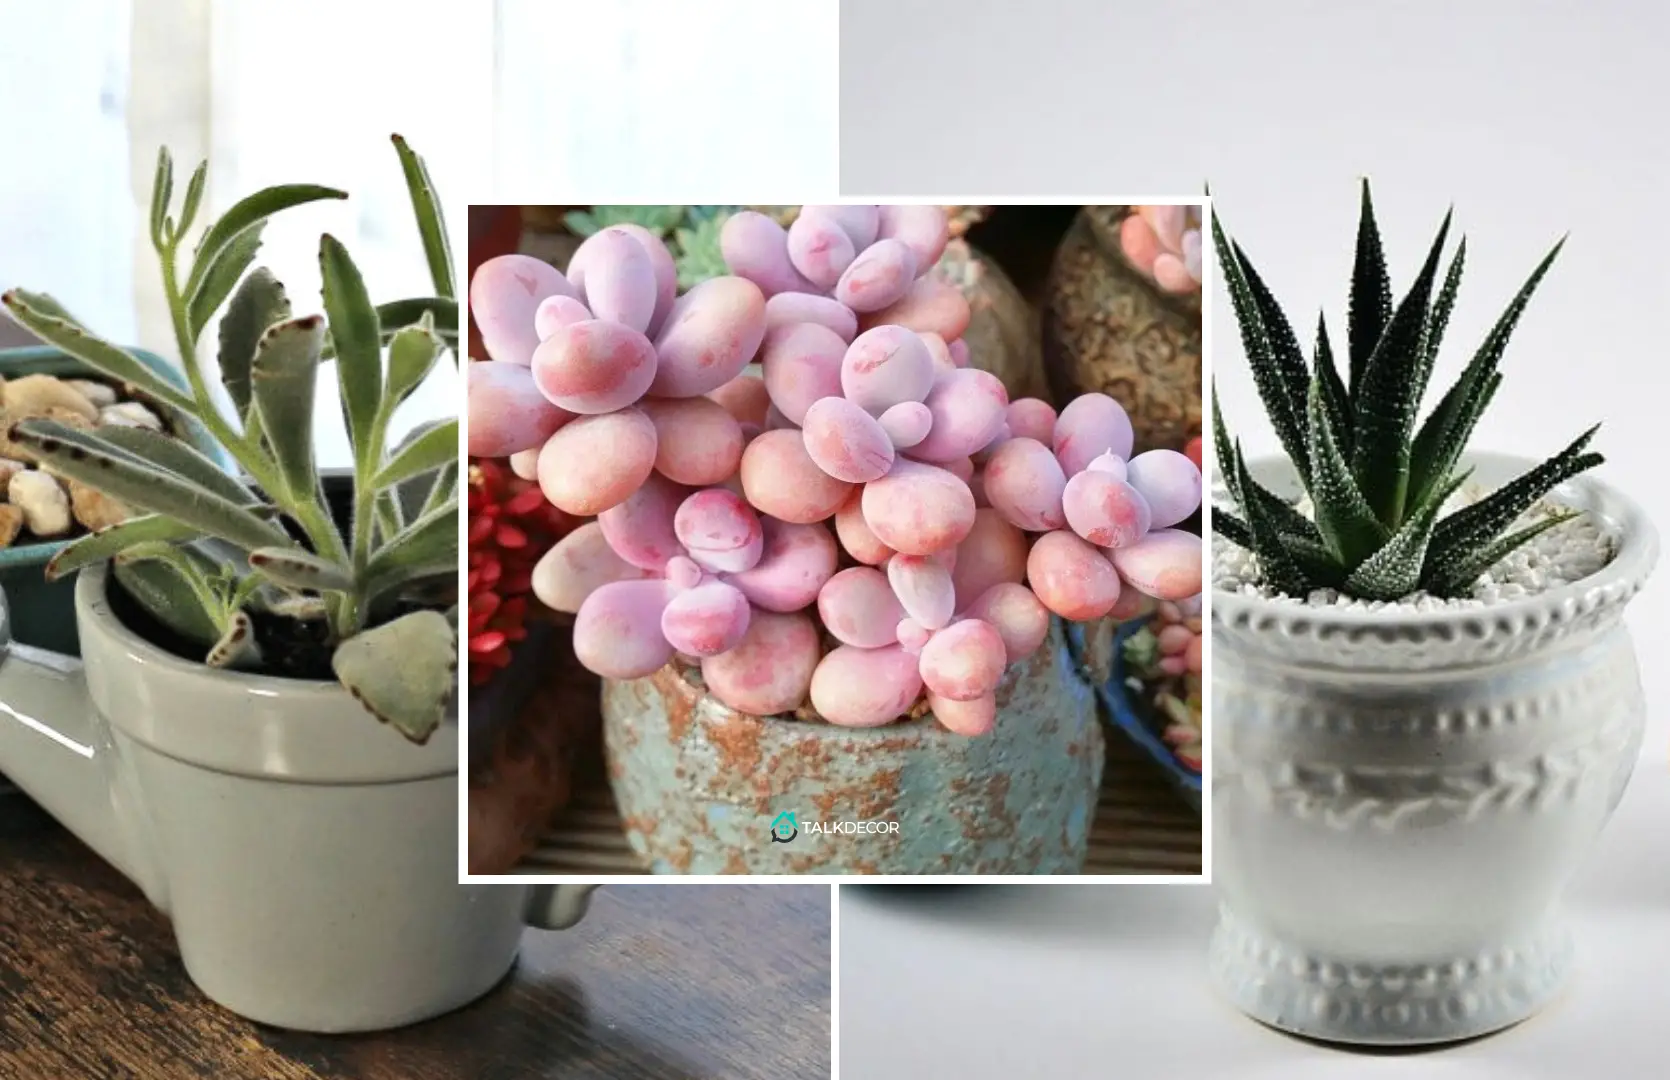 Pick These Succulent Types for Your Amazing Mini Garden